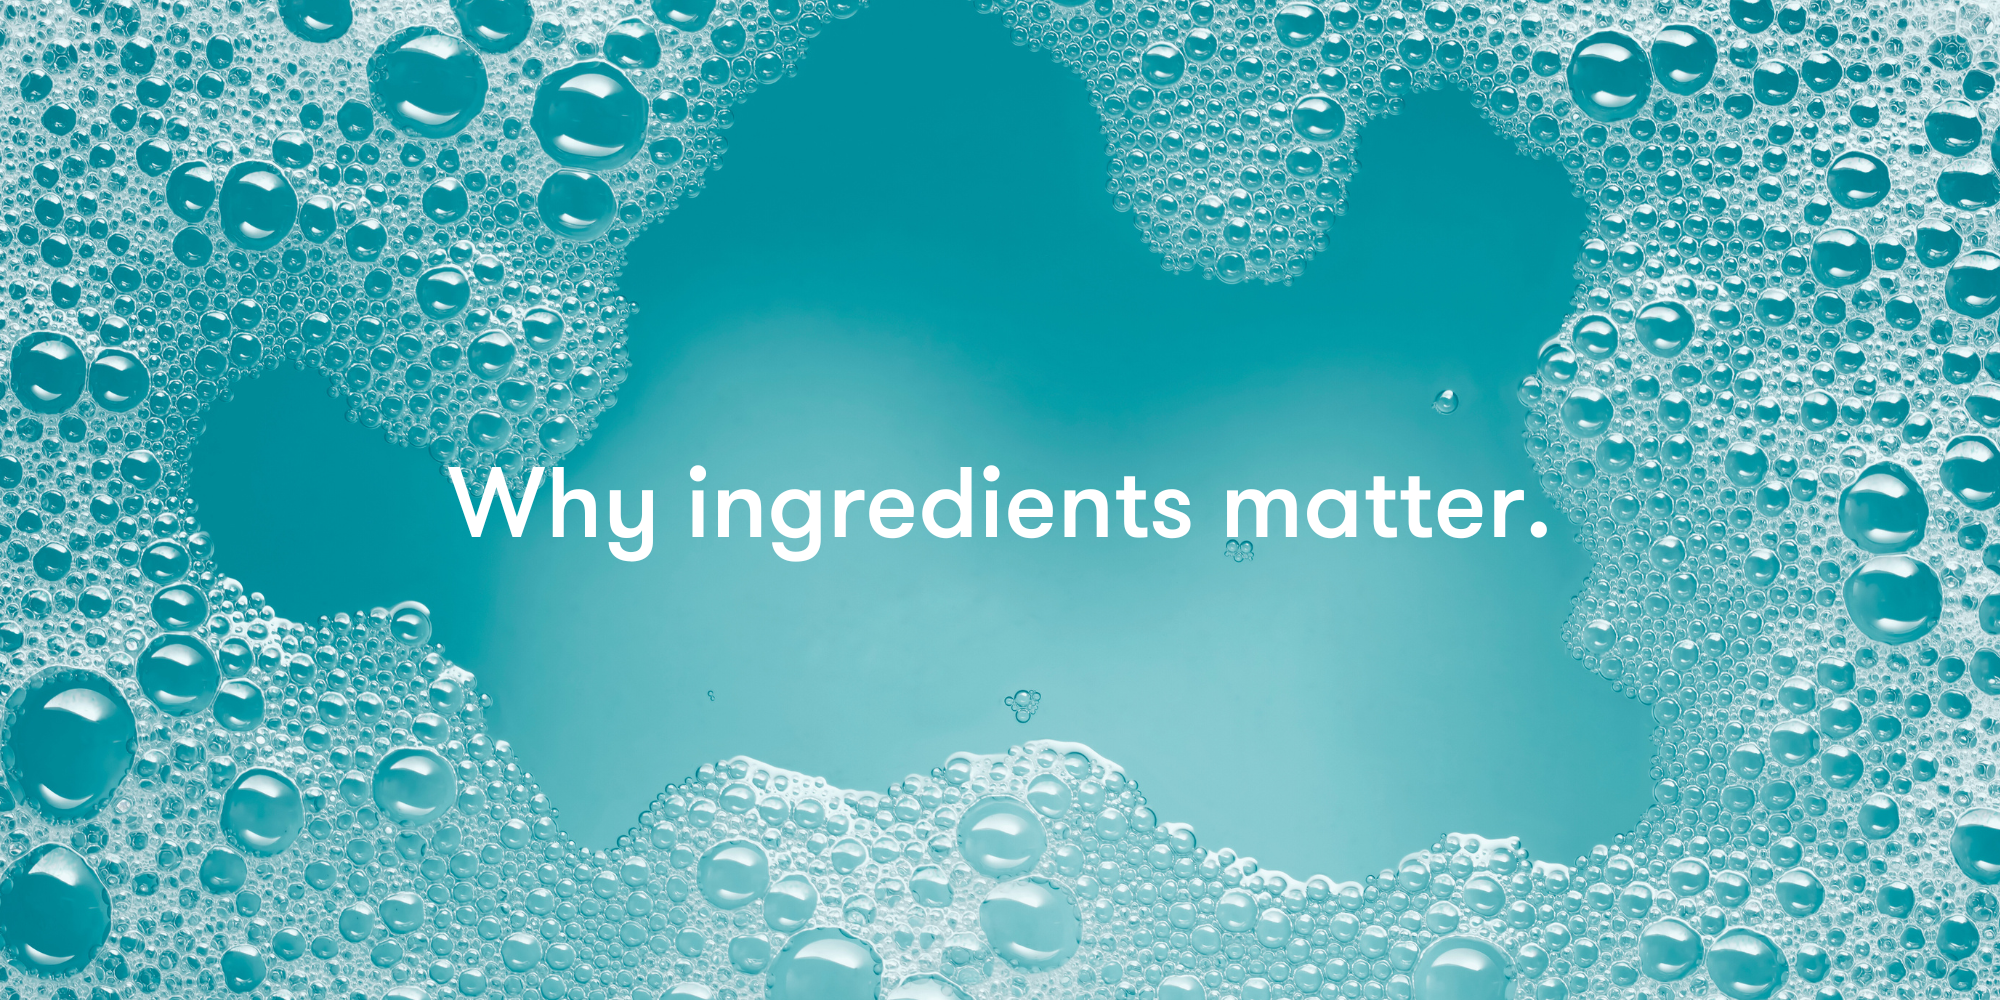 Why chemicals in personal care products matter.